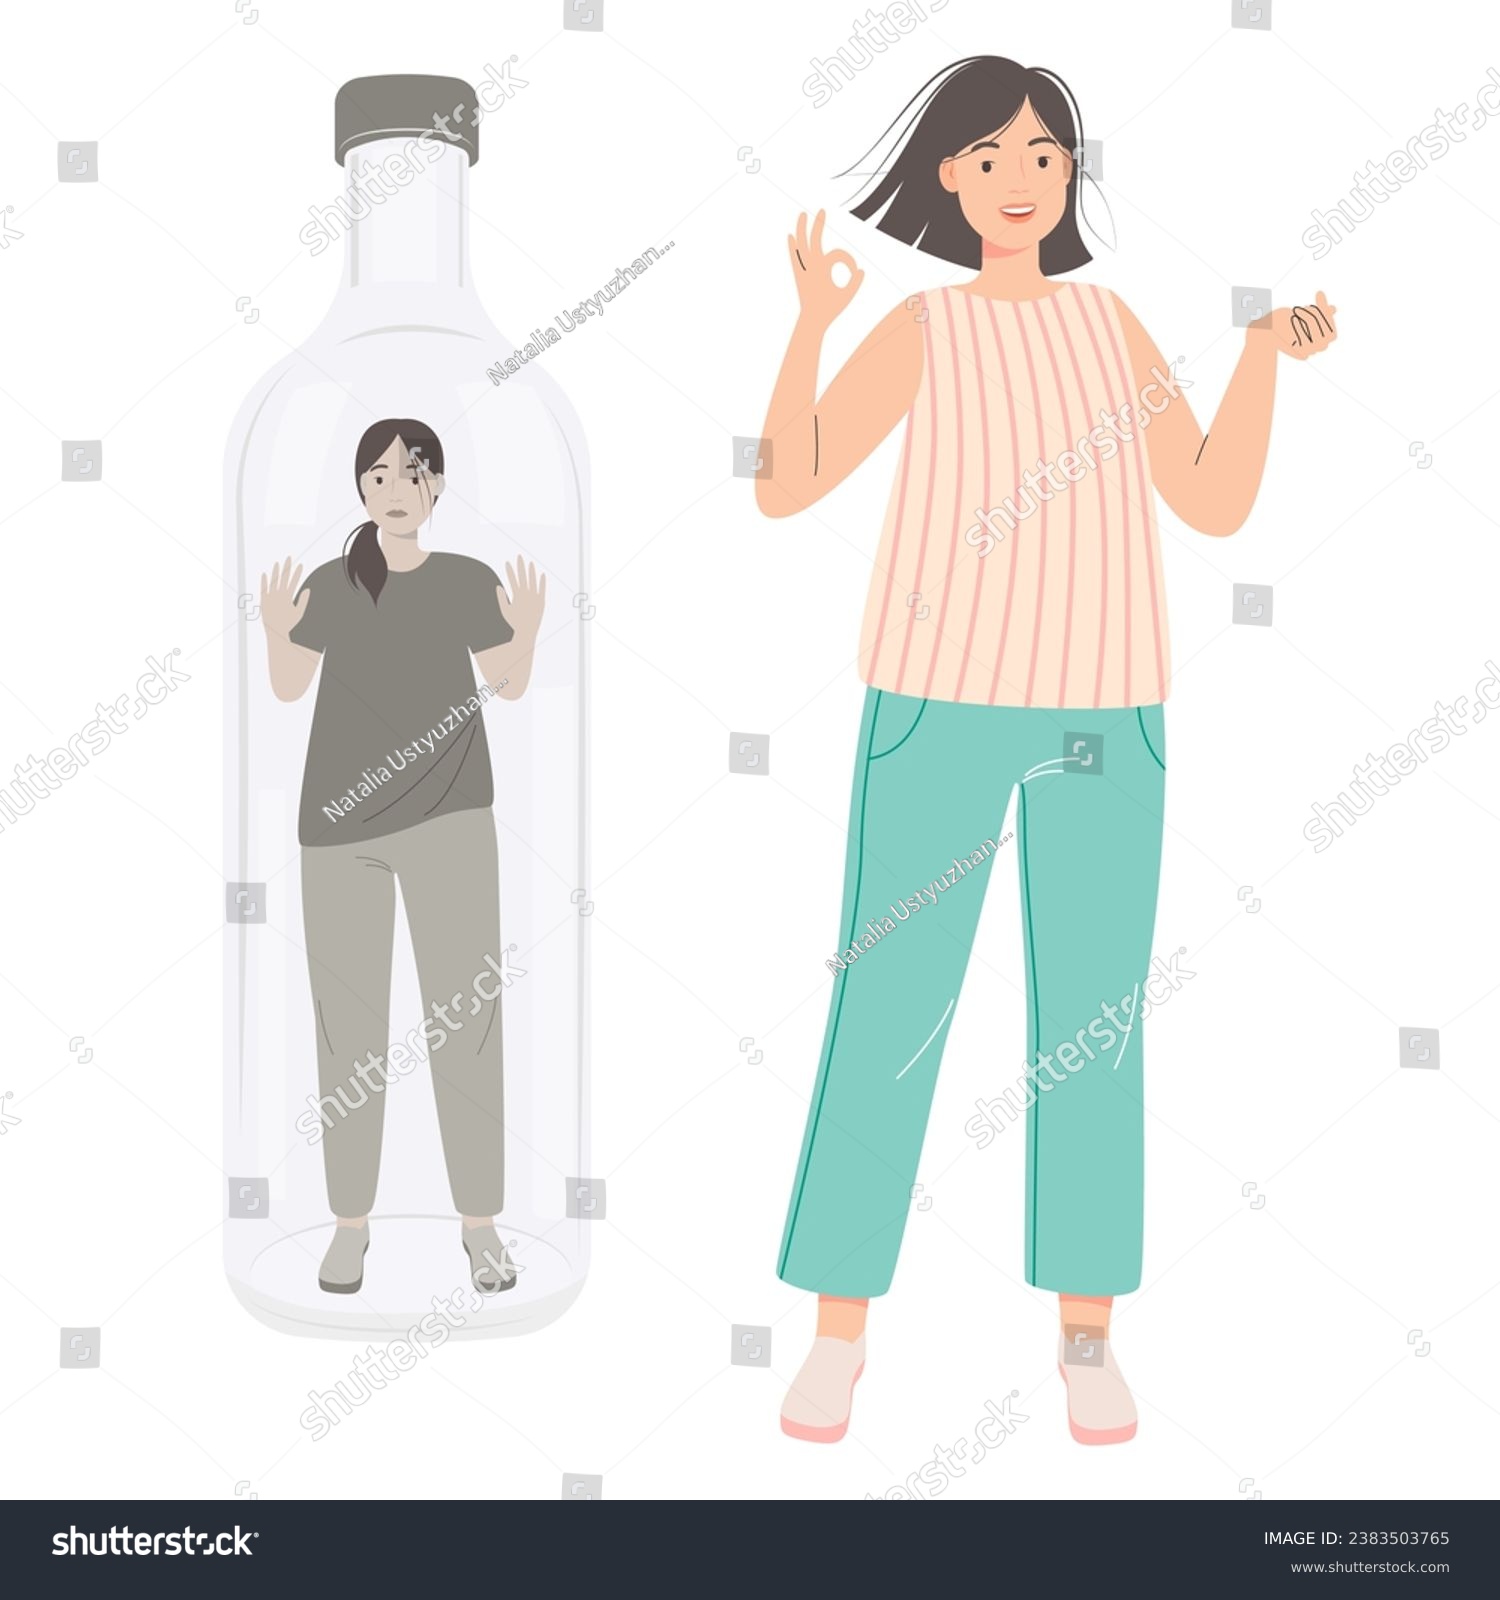 SVG of Addiction to alcohol and depression concept. Unhappy woman woman trapped in a bottle. Sad drunk female person, exhausted alcoholic. Social issue, abuse, addiction.  vector Illustration svg